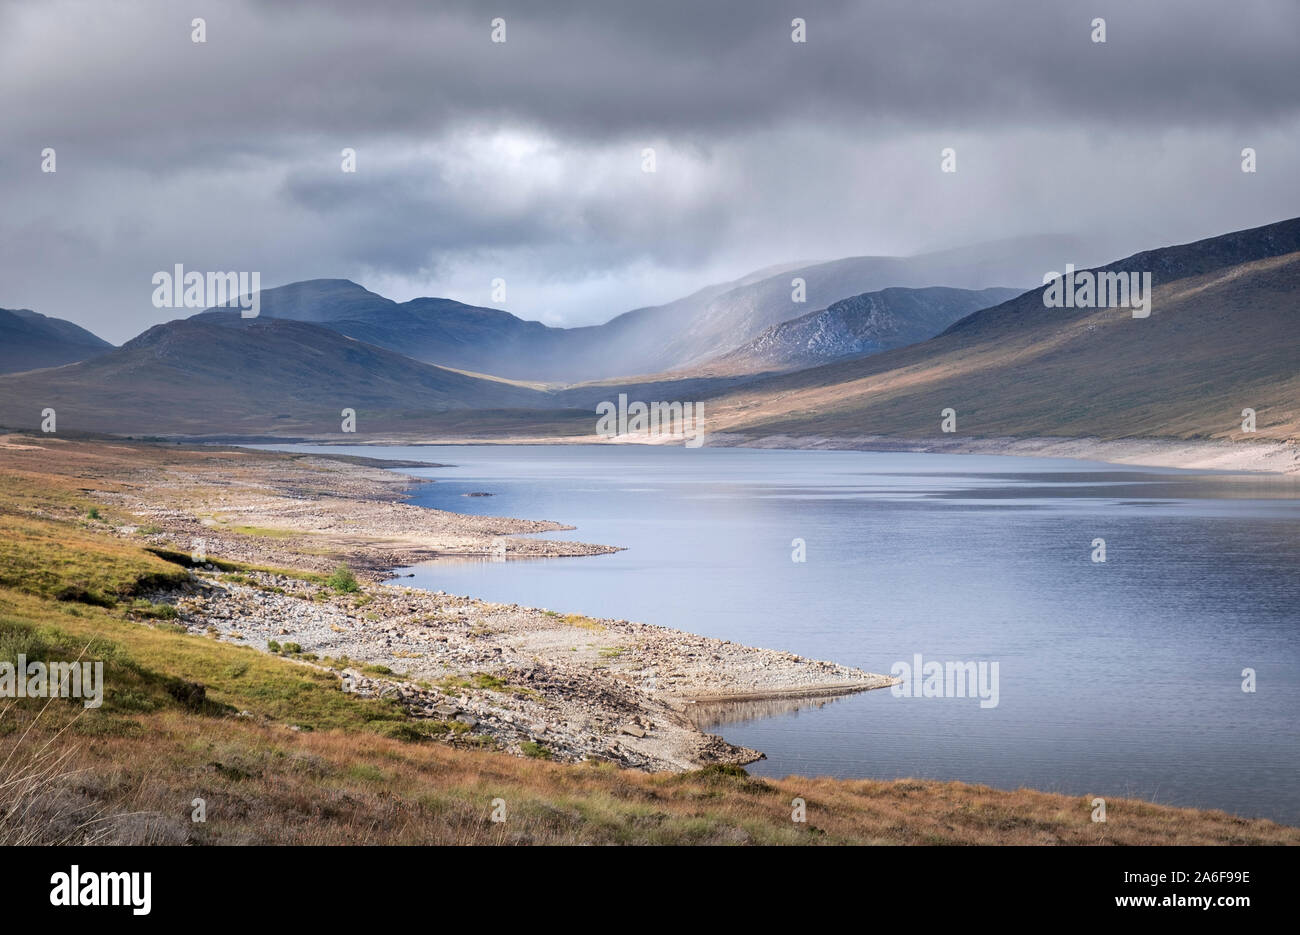 Lake & mountain landscape - Loch Glascarnoch in Sutherland in the North West Scottish Highlands Stock Photo